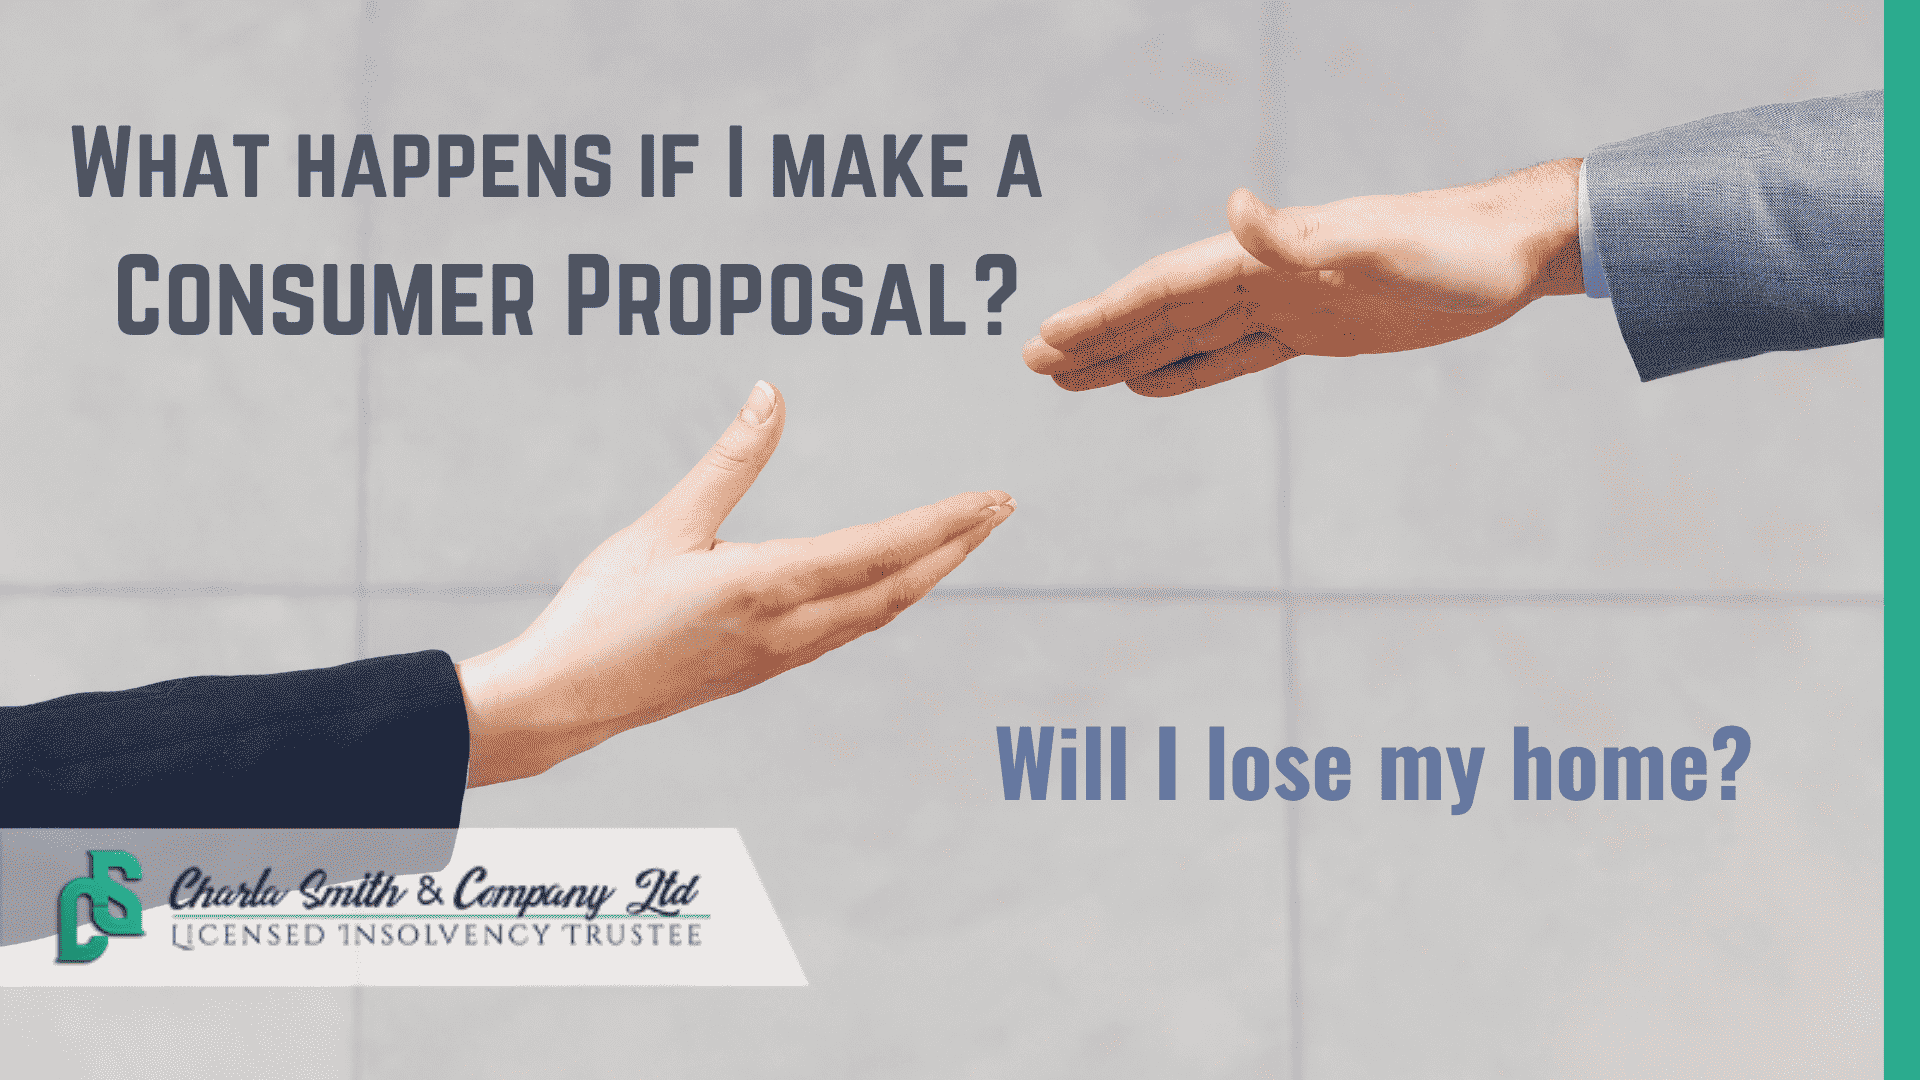 What happens when I make a Consumer Proposal? Will I lose my home?